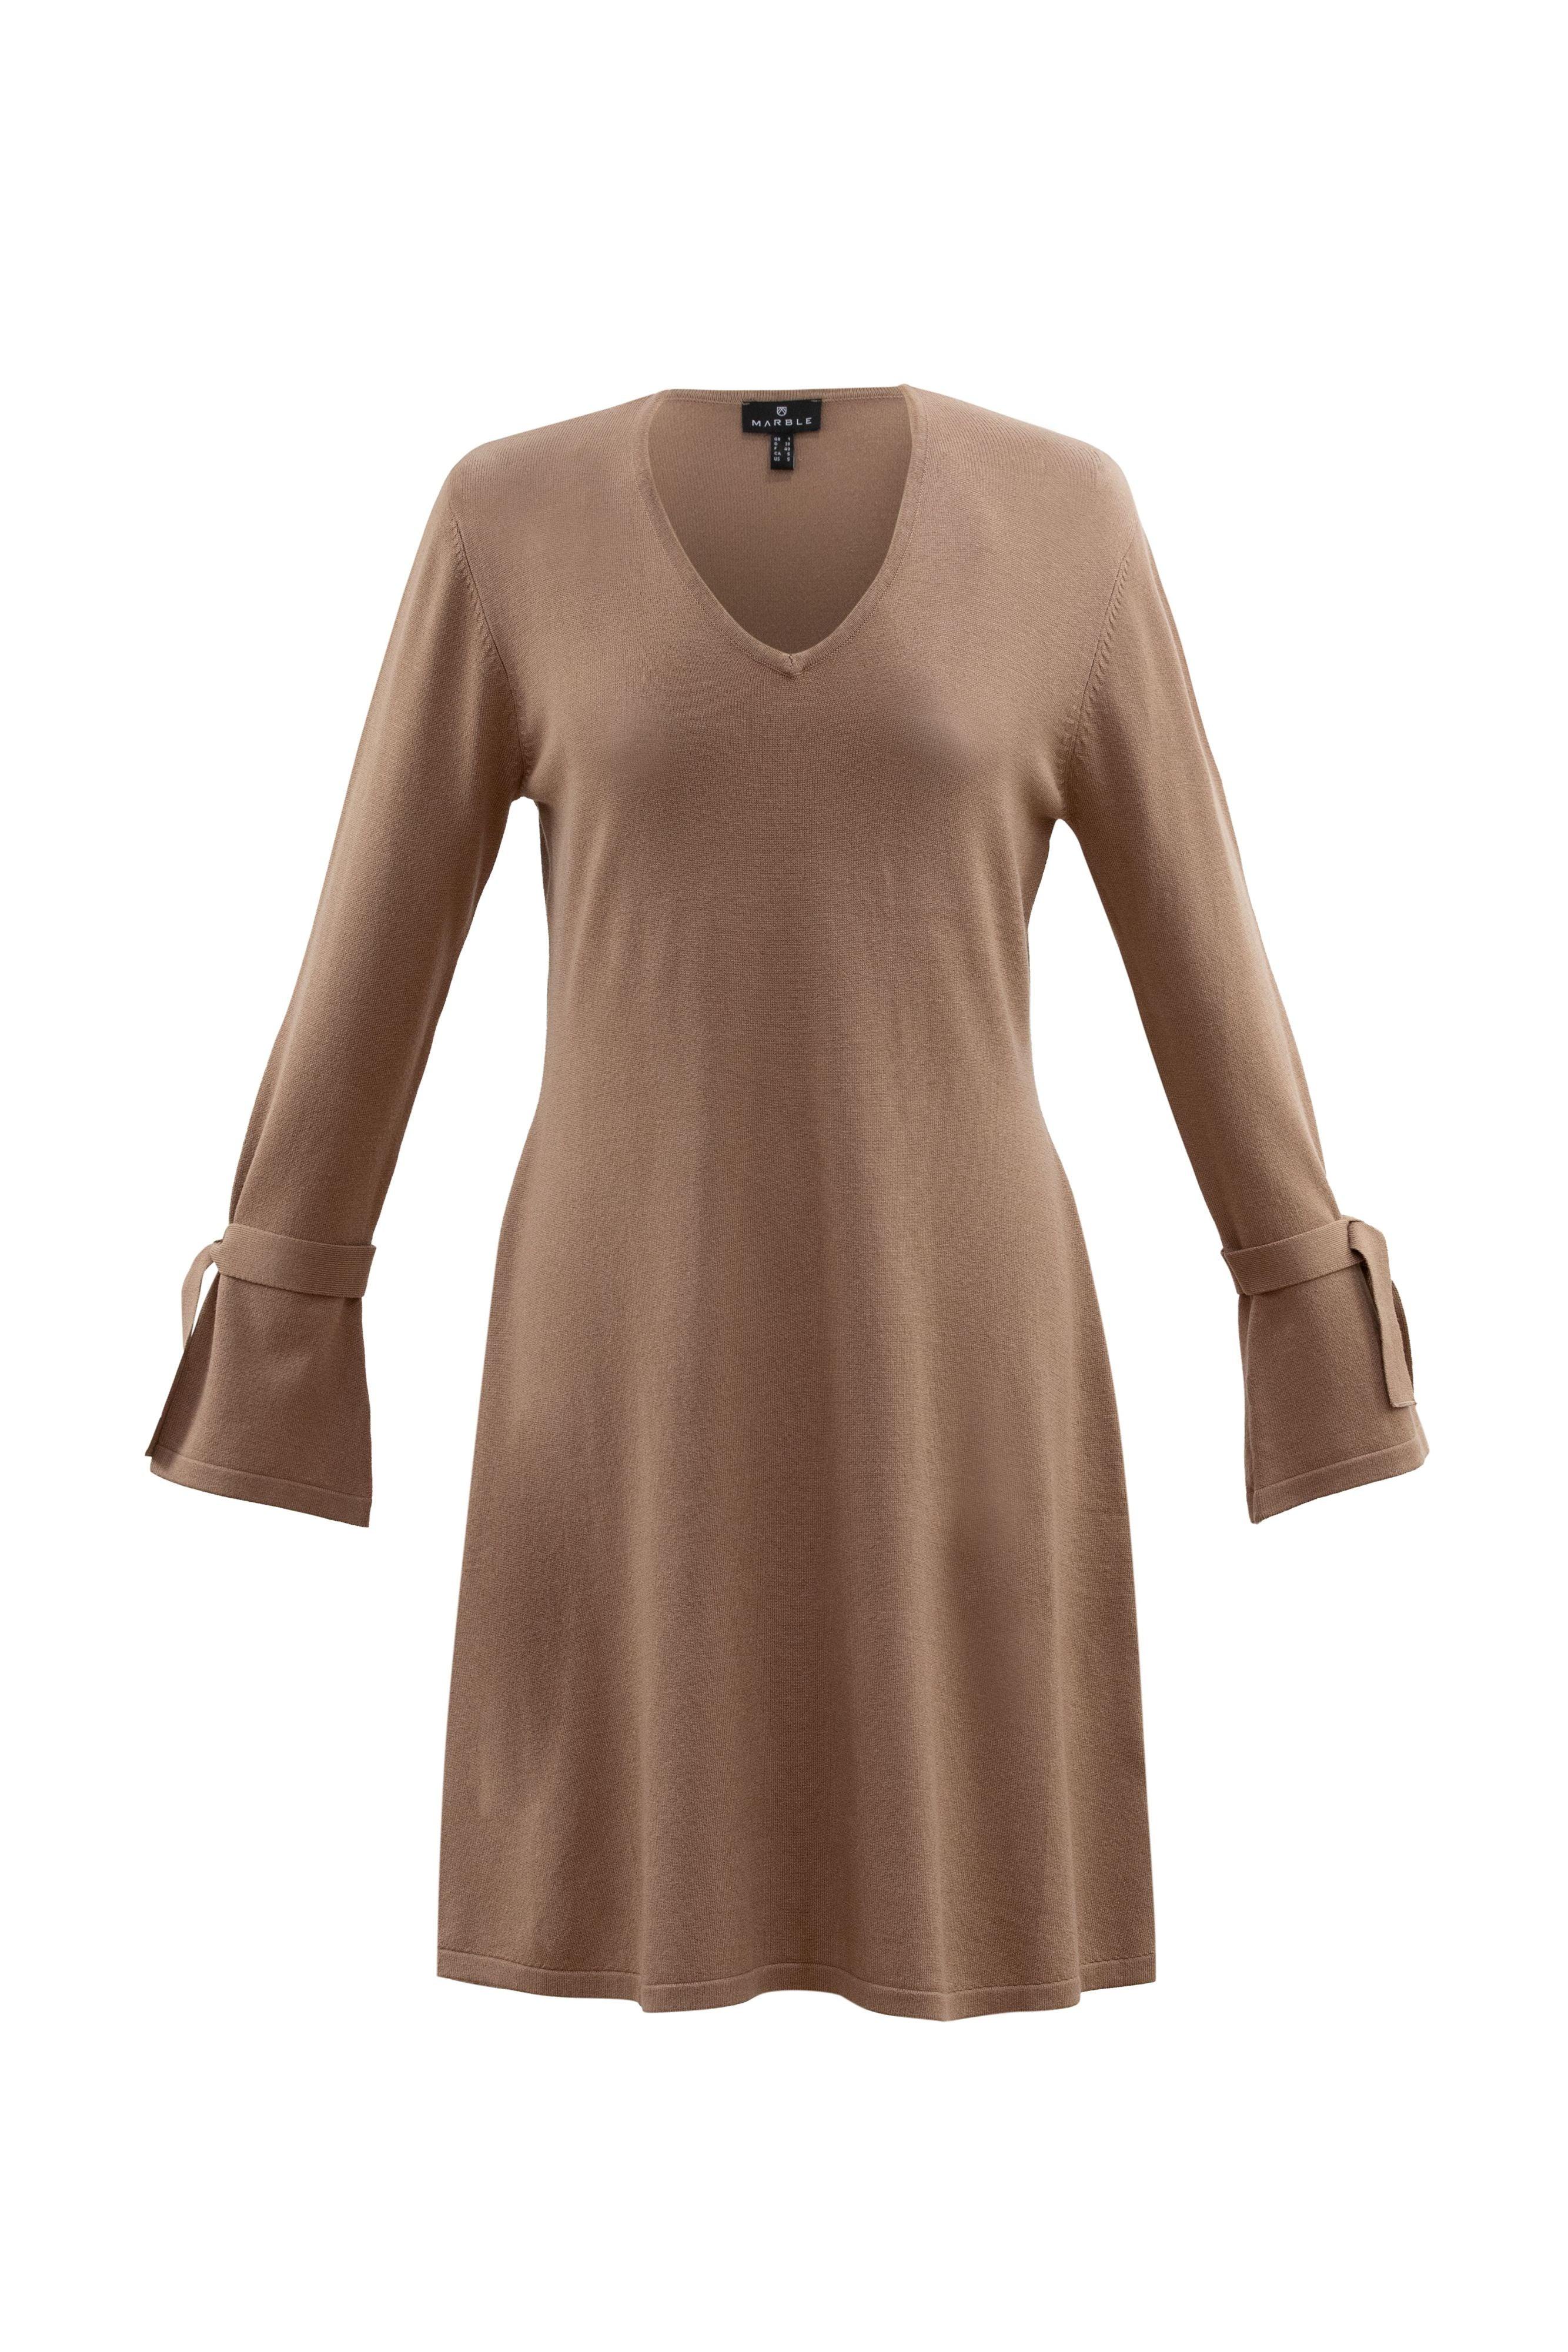 MARBLE FIT AND FLARE DRESS 6328 CAMEL freeshipping - Solitaire Fashions Darwen